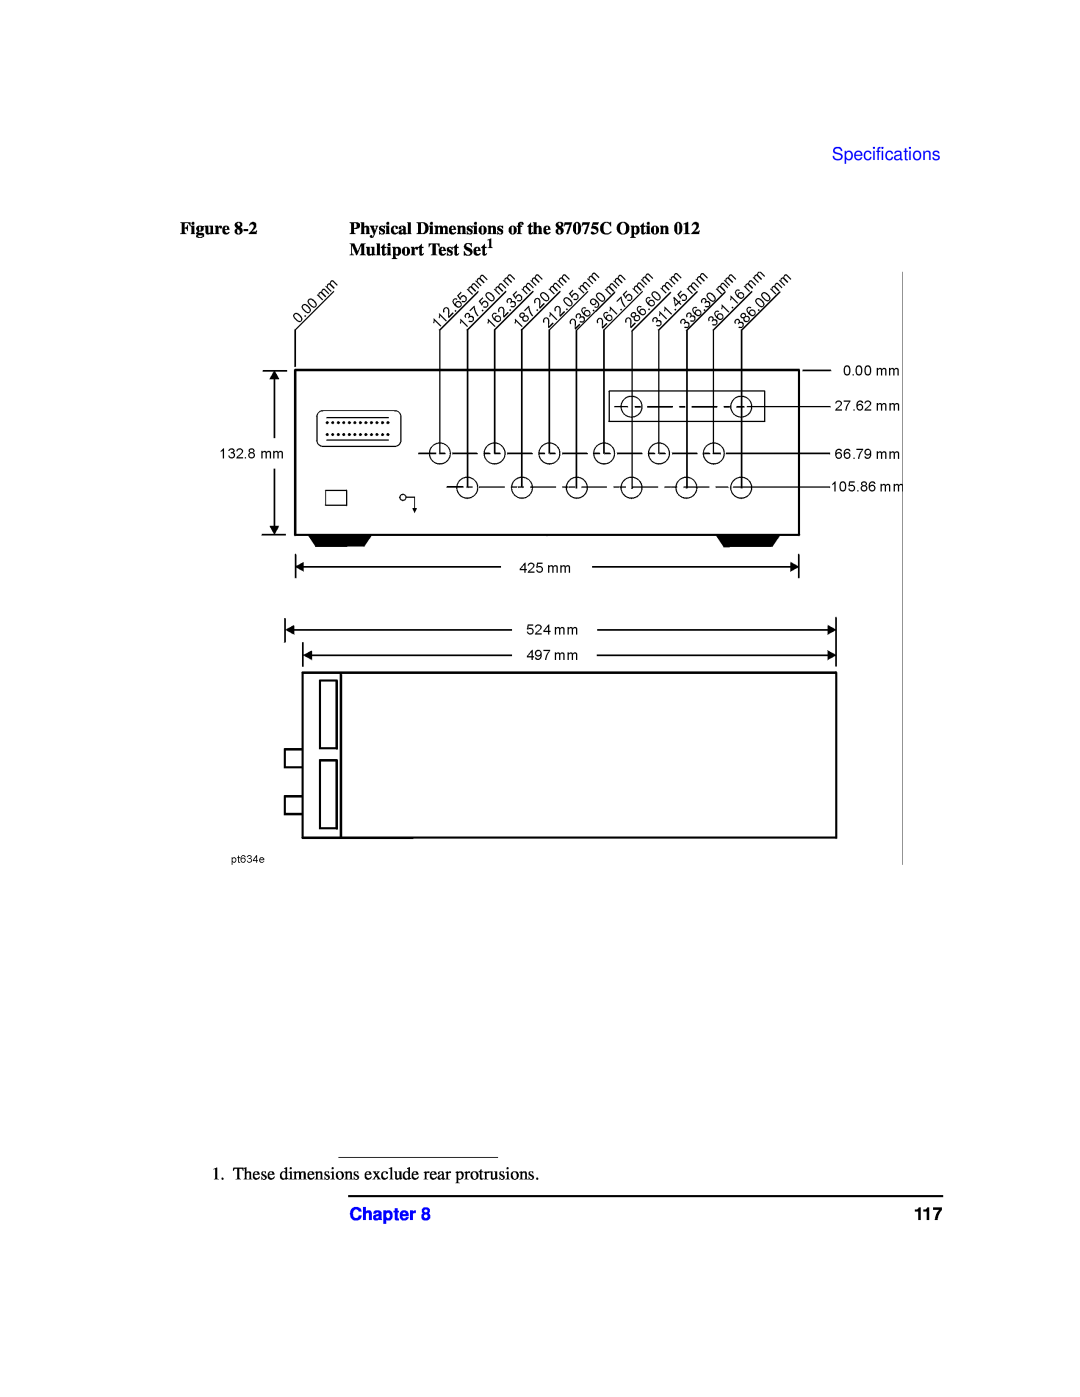 Agilent Technologies manual Specifications, Physical Dimensions of the 87075C Option, Multiport Test Set1, Chapter 